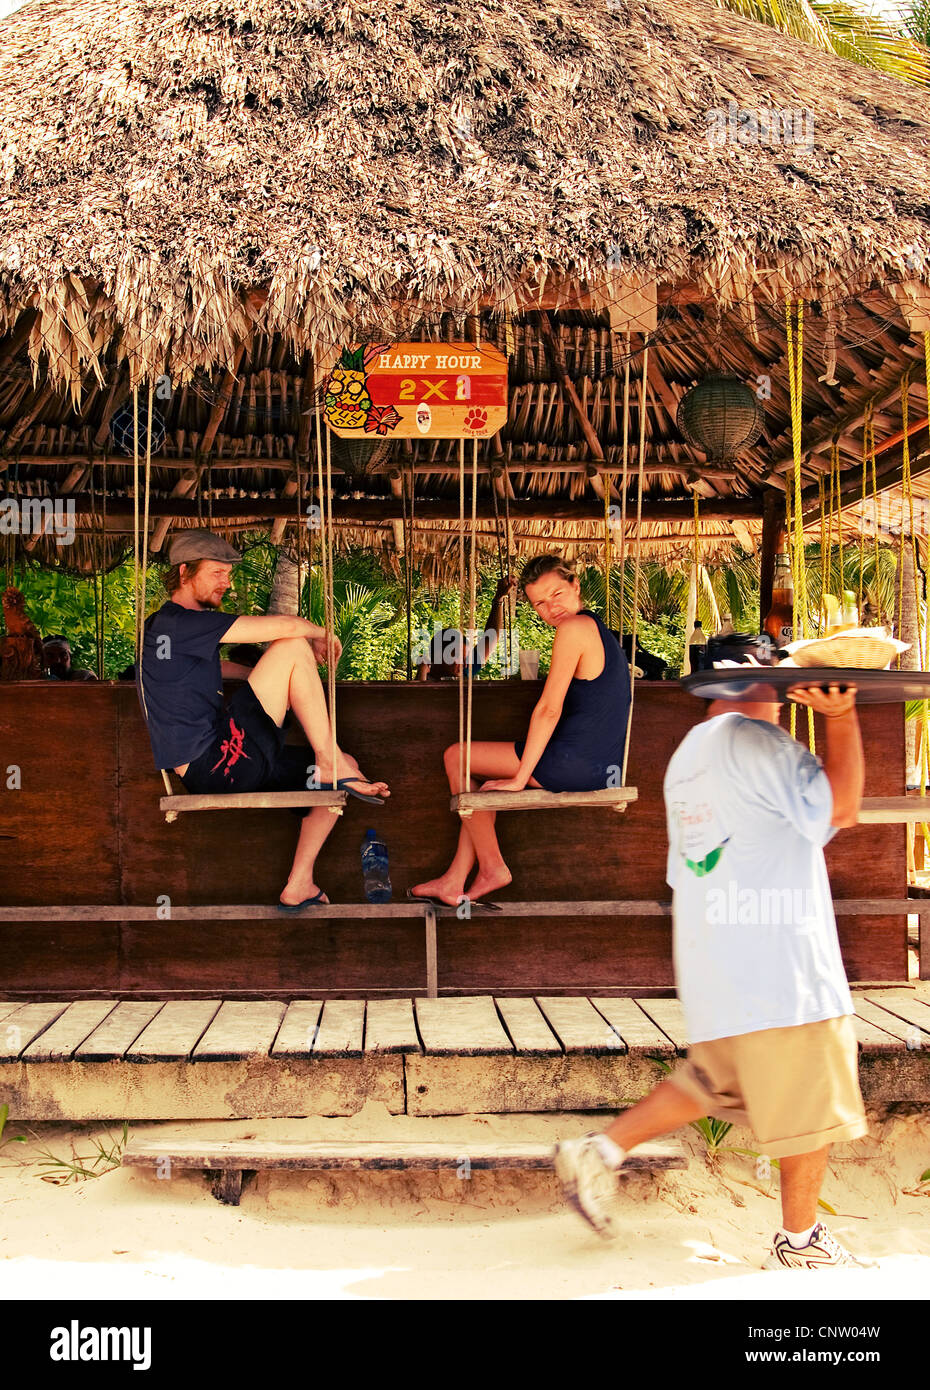 Happy hour at a beachside bar in Isla Mujeres on Playa Norte. Stock Photo